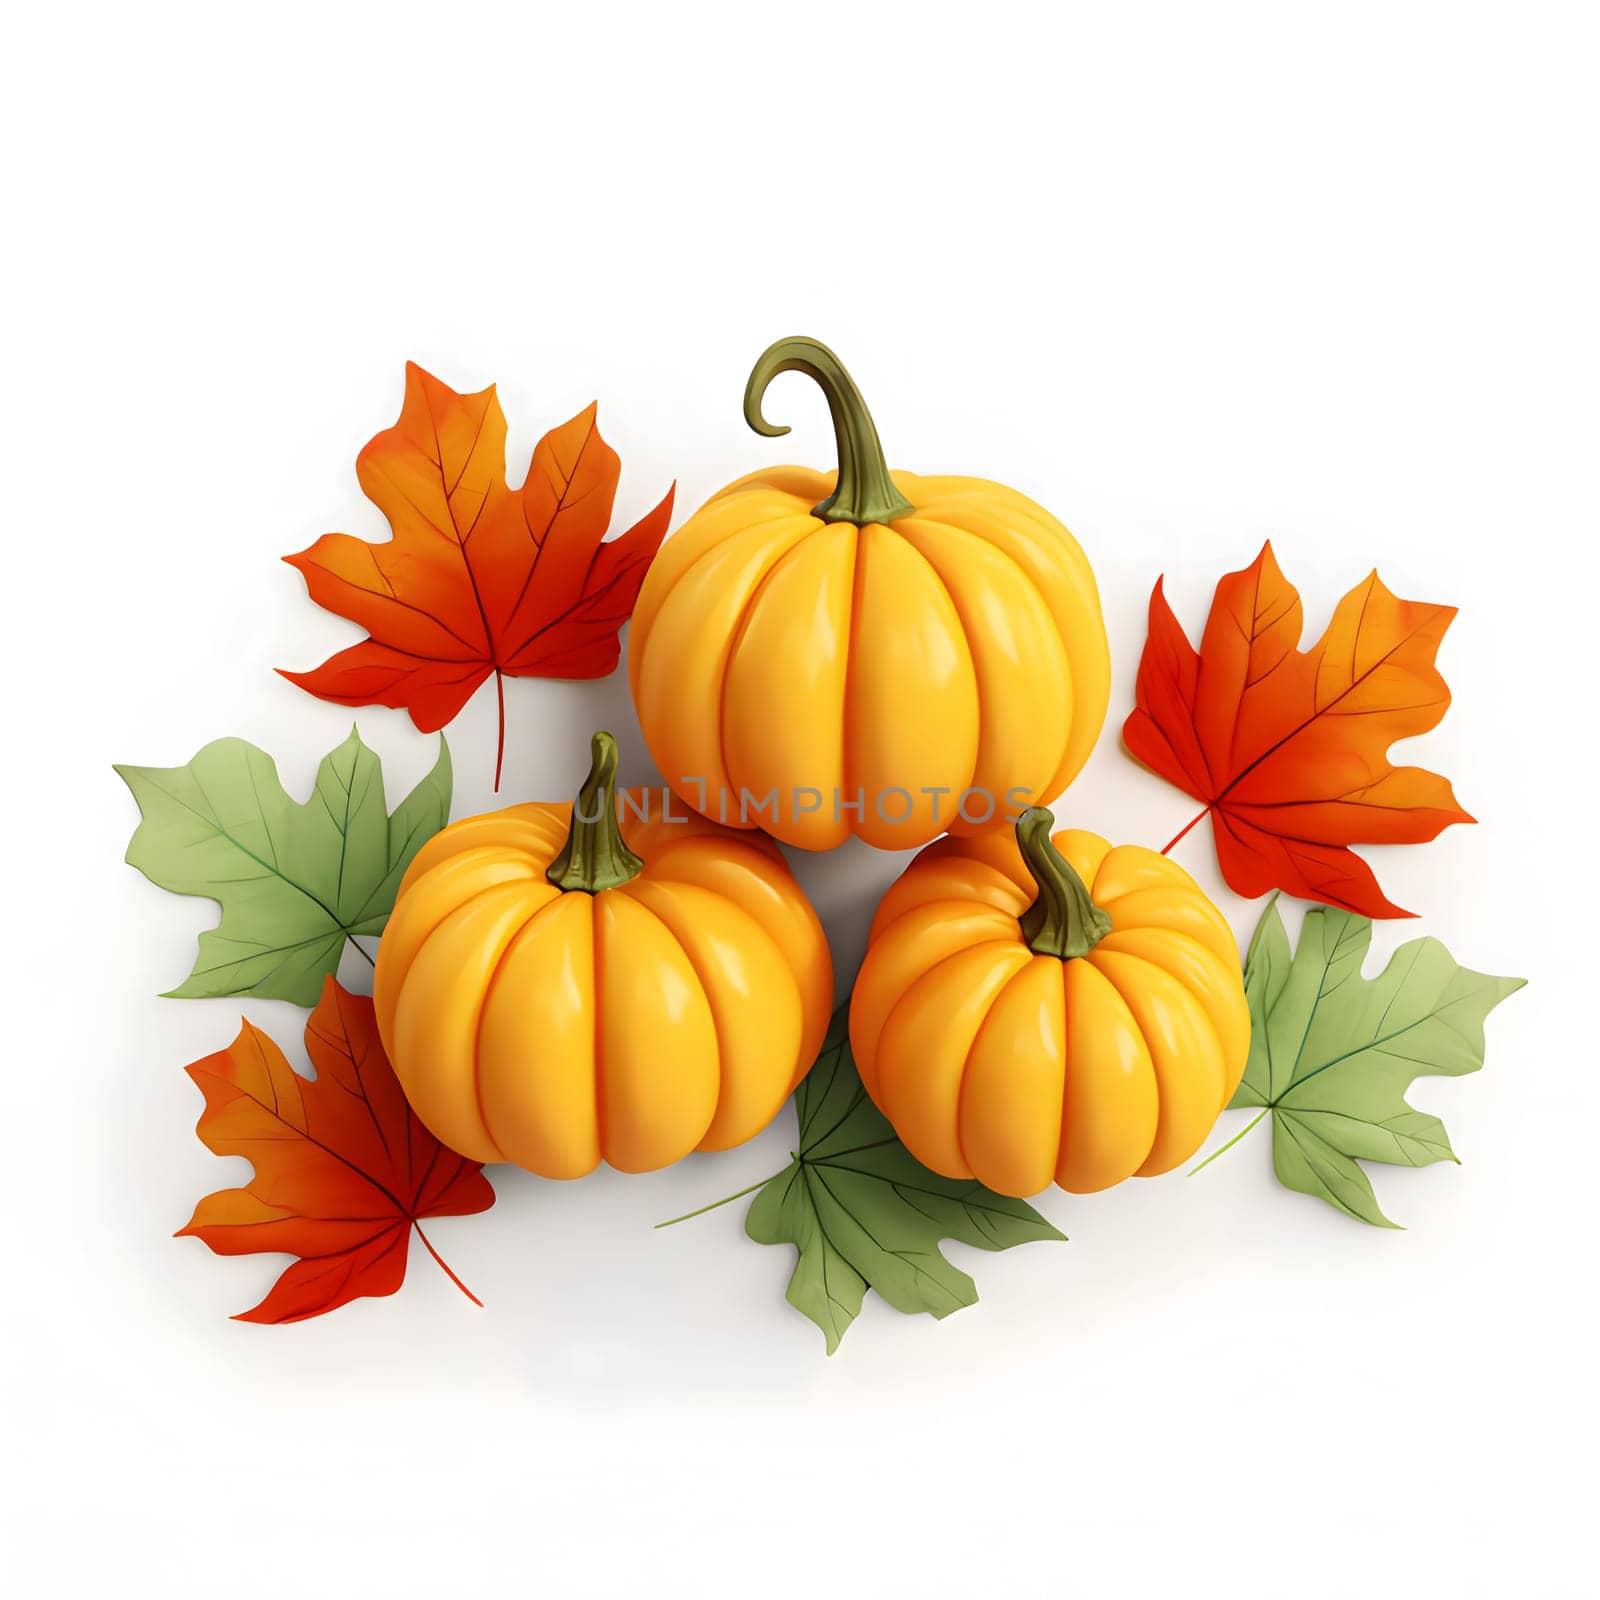 Three pumpkins and autumn leaves, Halloween image on a white isolated background. Atmosphere of darkness and fear.